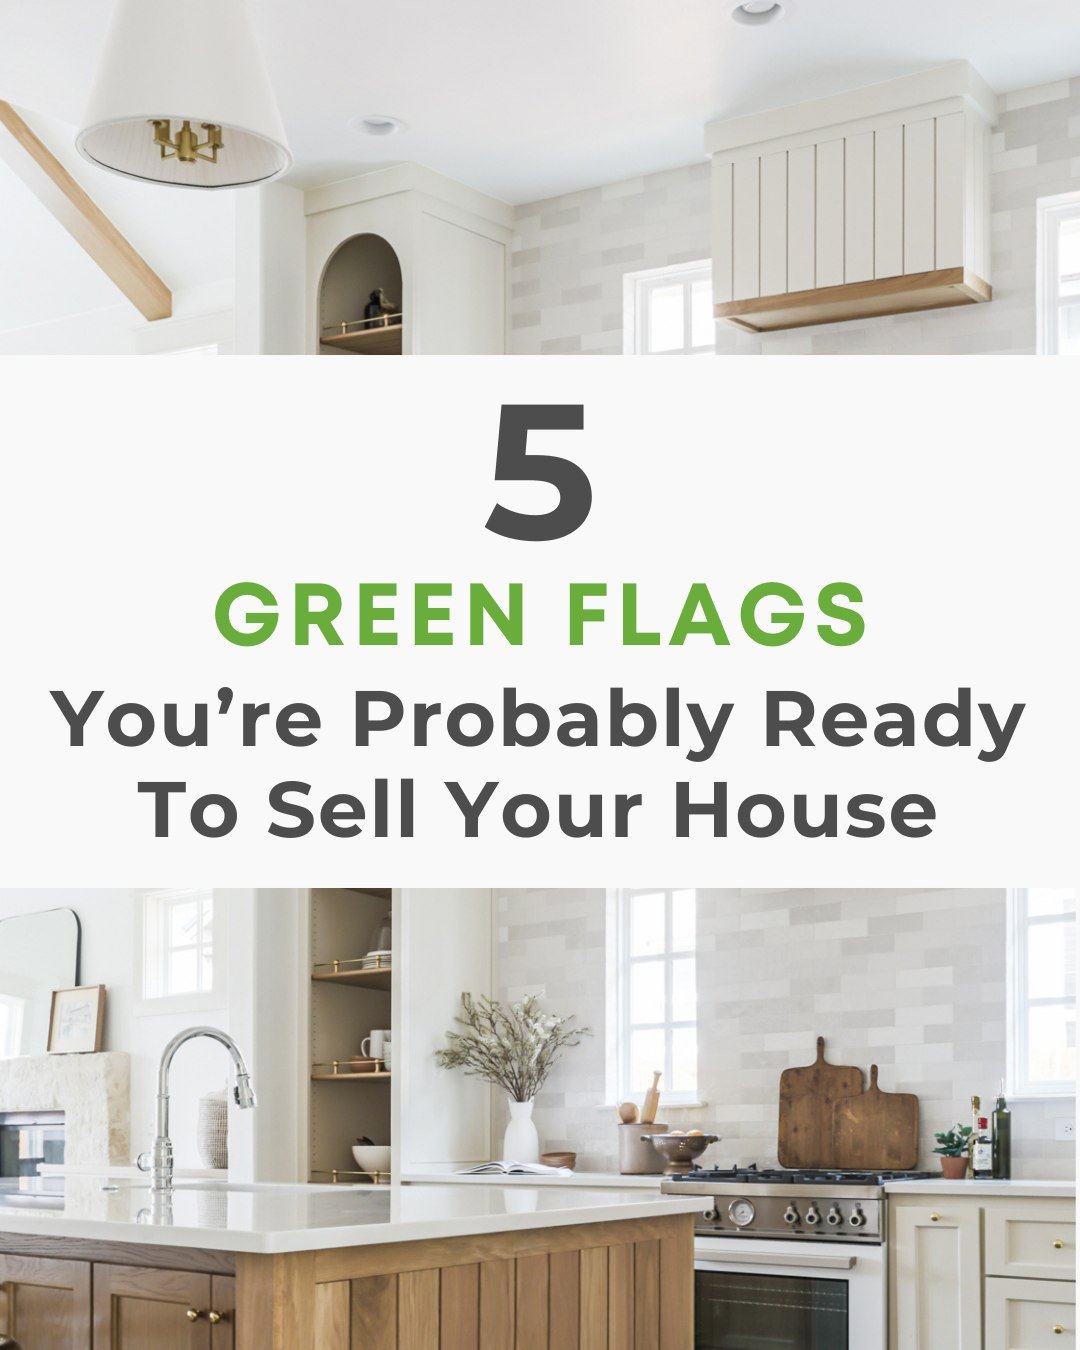 Think you&rsquo;re ready to sell your house? Let&rsquo;s check! 

Swipe through this post to see some of the green flags that you&rsquo;re probably ready to sell your house. 

If you find these things resonating with you and your situation with your 